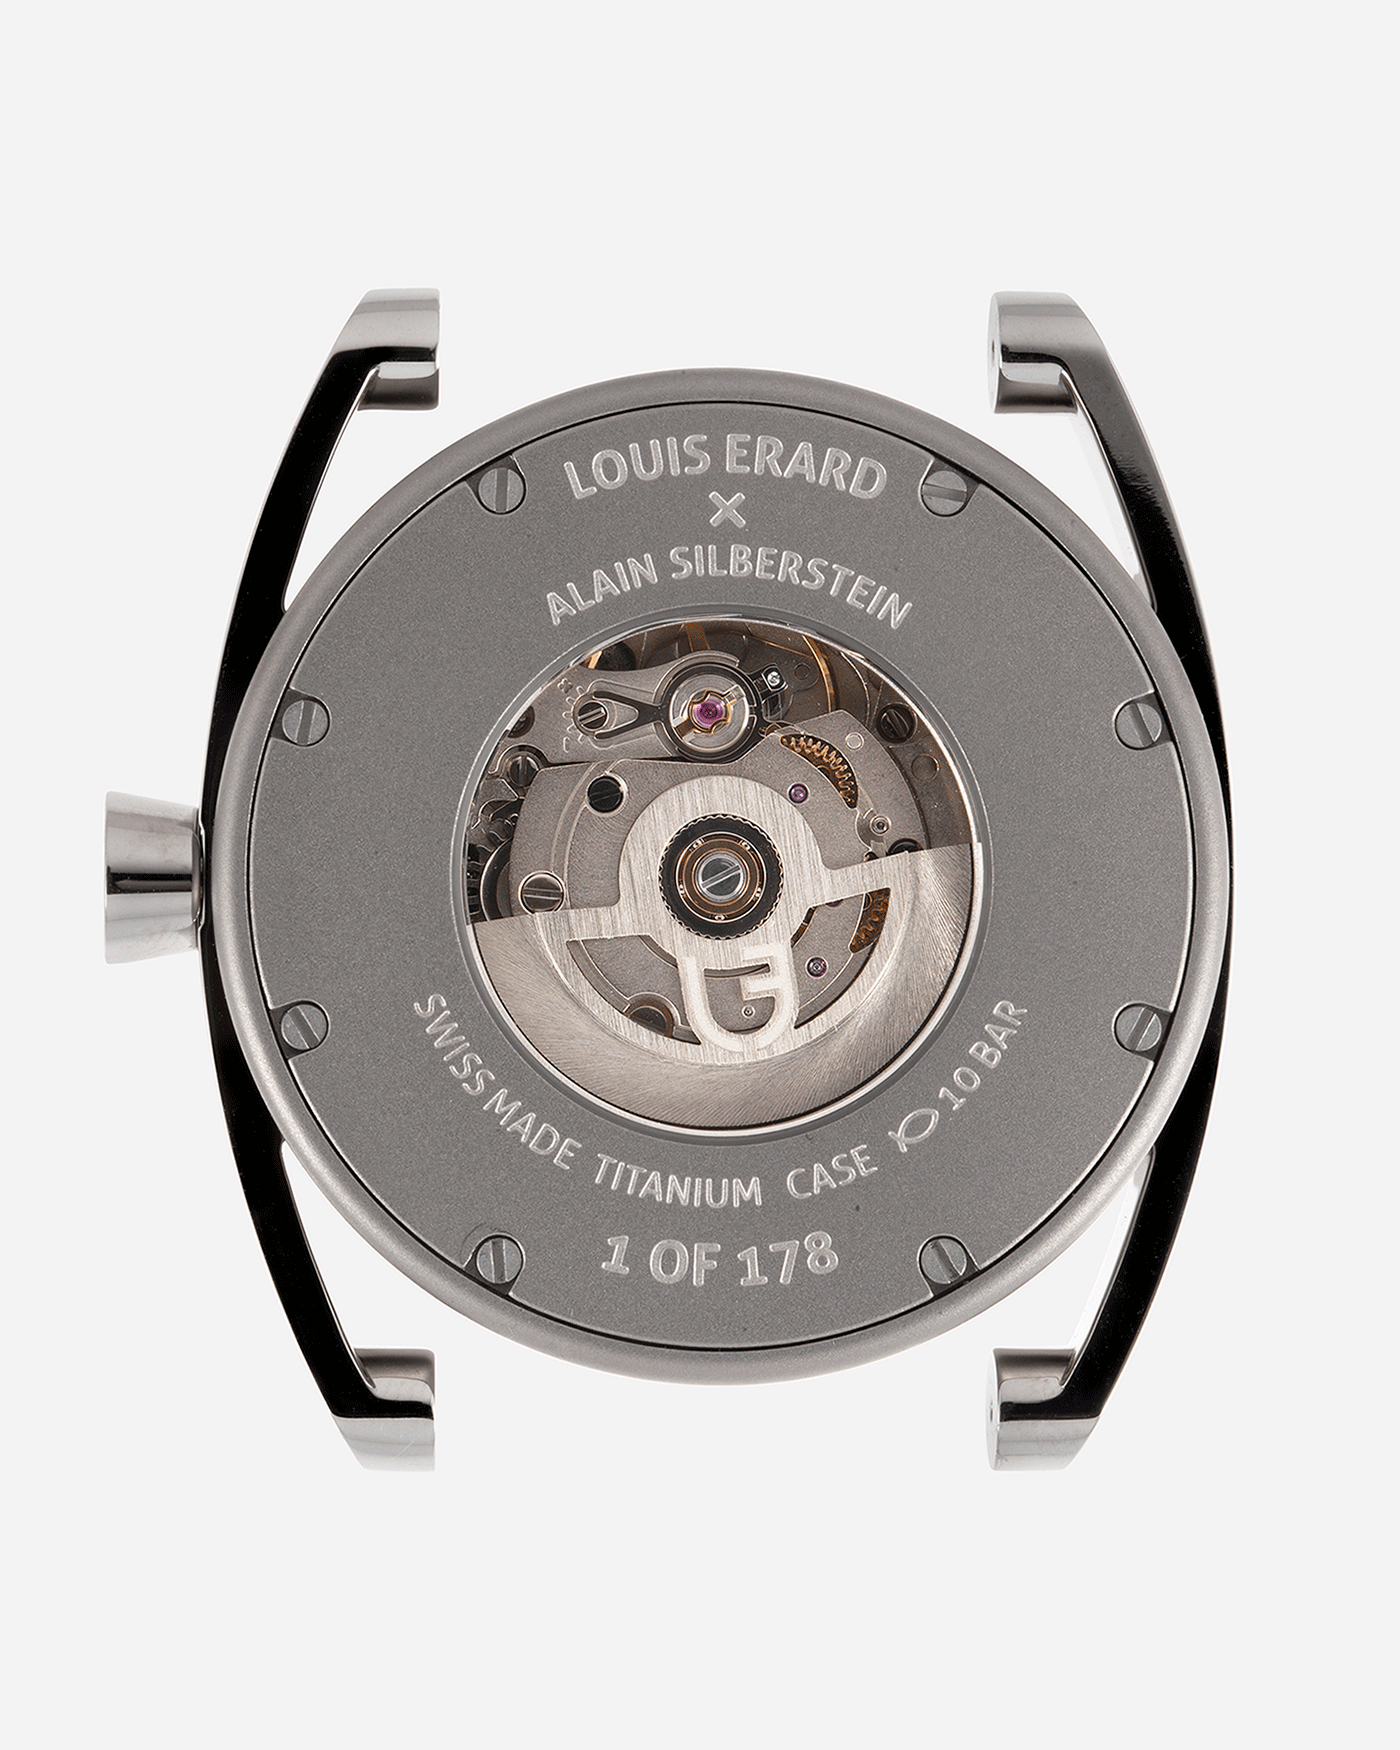 Brand: Louis Erard X Alain Silberstein Year: 2021 Model: Le Regulateur Material: Stainless Steel Movement: Selitta Based Self Winding Movement Case Diameter: 40mm Bracelet/Strap: Louis Erard X Alain Silberstein Fabric Strap